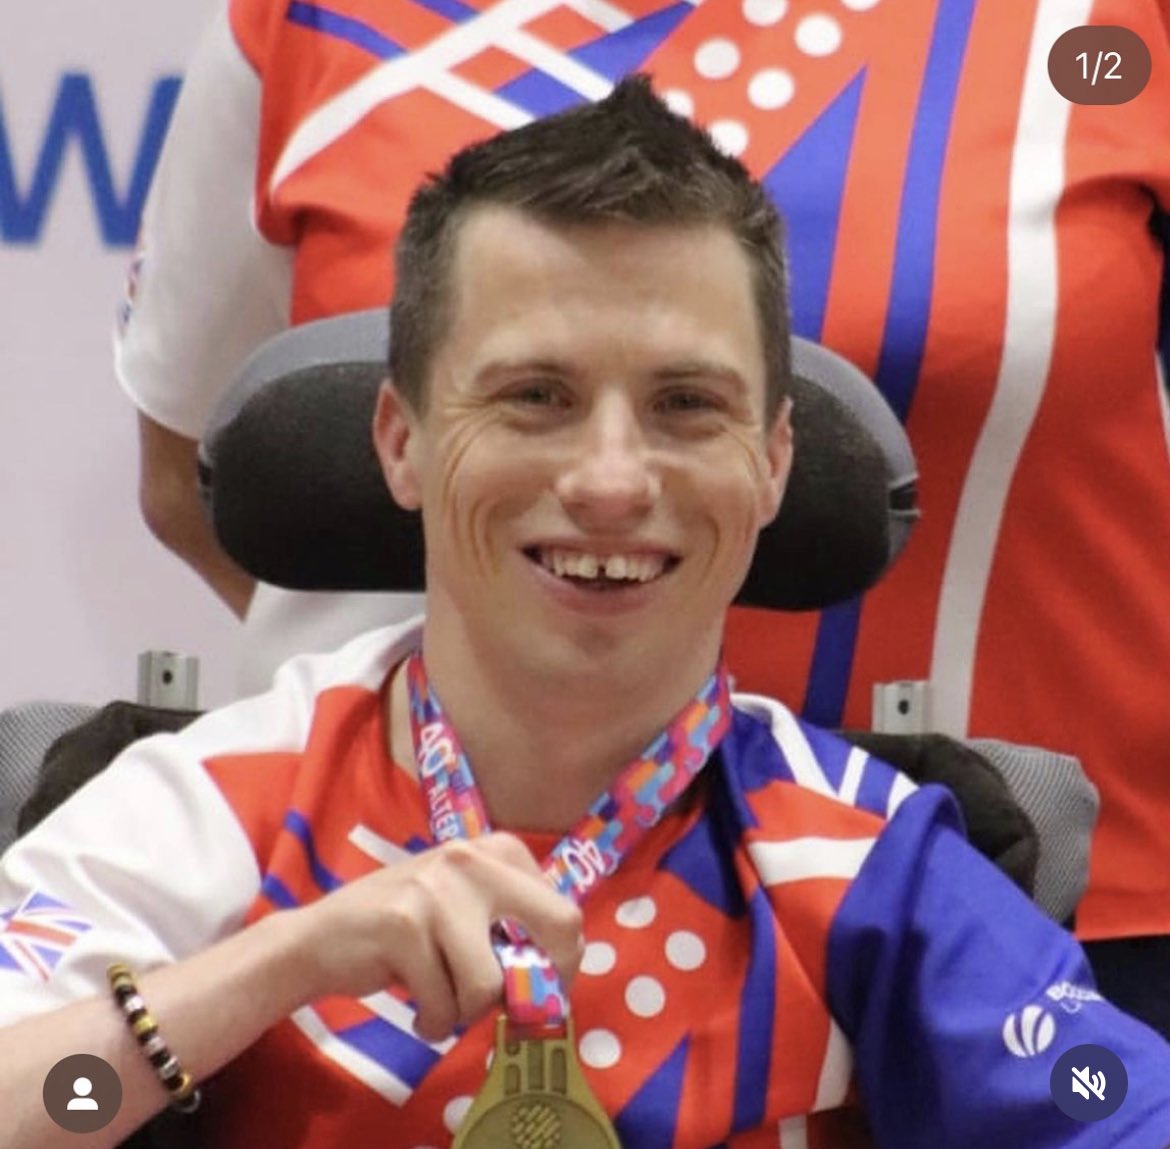 We’re at @NaidexShow. Come say hi on stand K176. Check out equipment, meet our Paralympic athletes and find out how to get involved. Tomorrow, we’re joined by World Champion @TaggartClaire and on Thursday, come chat to @Bocciasmithy - Britain’s best ever #boccia player